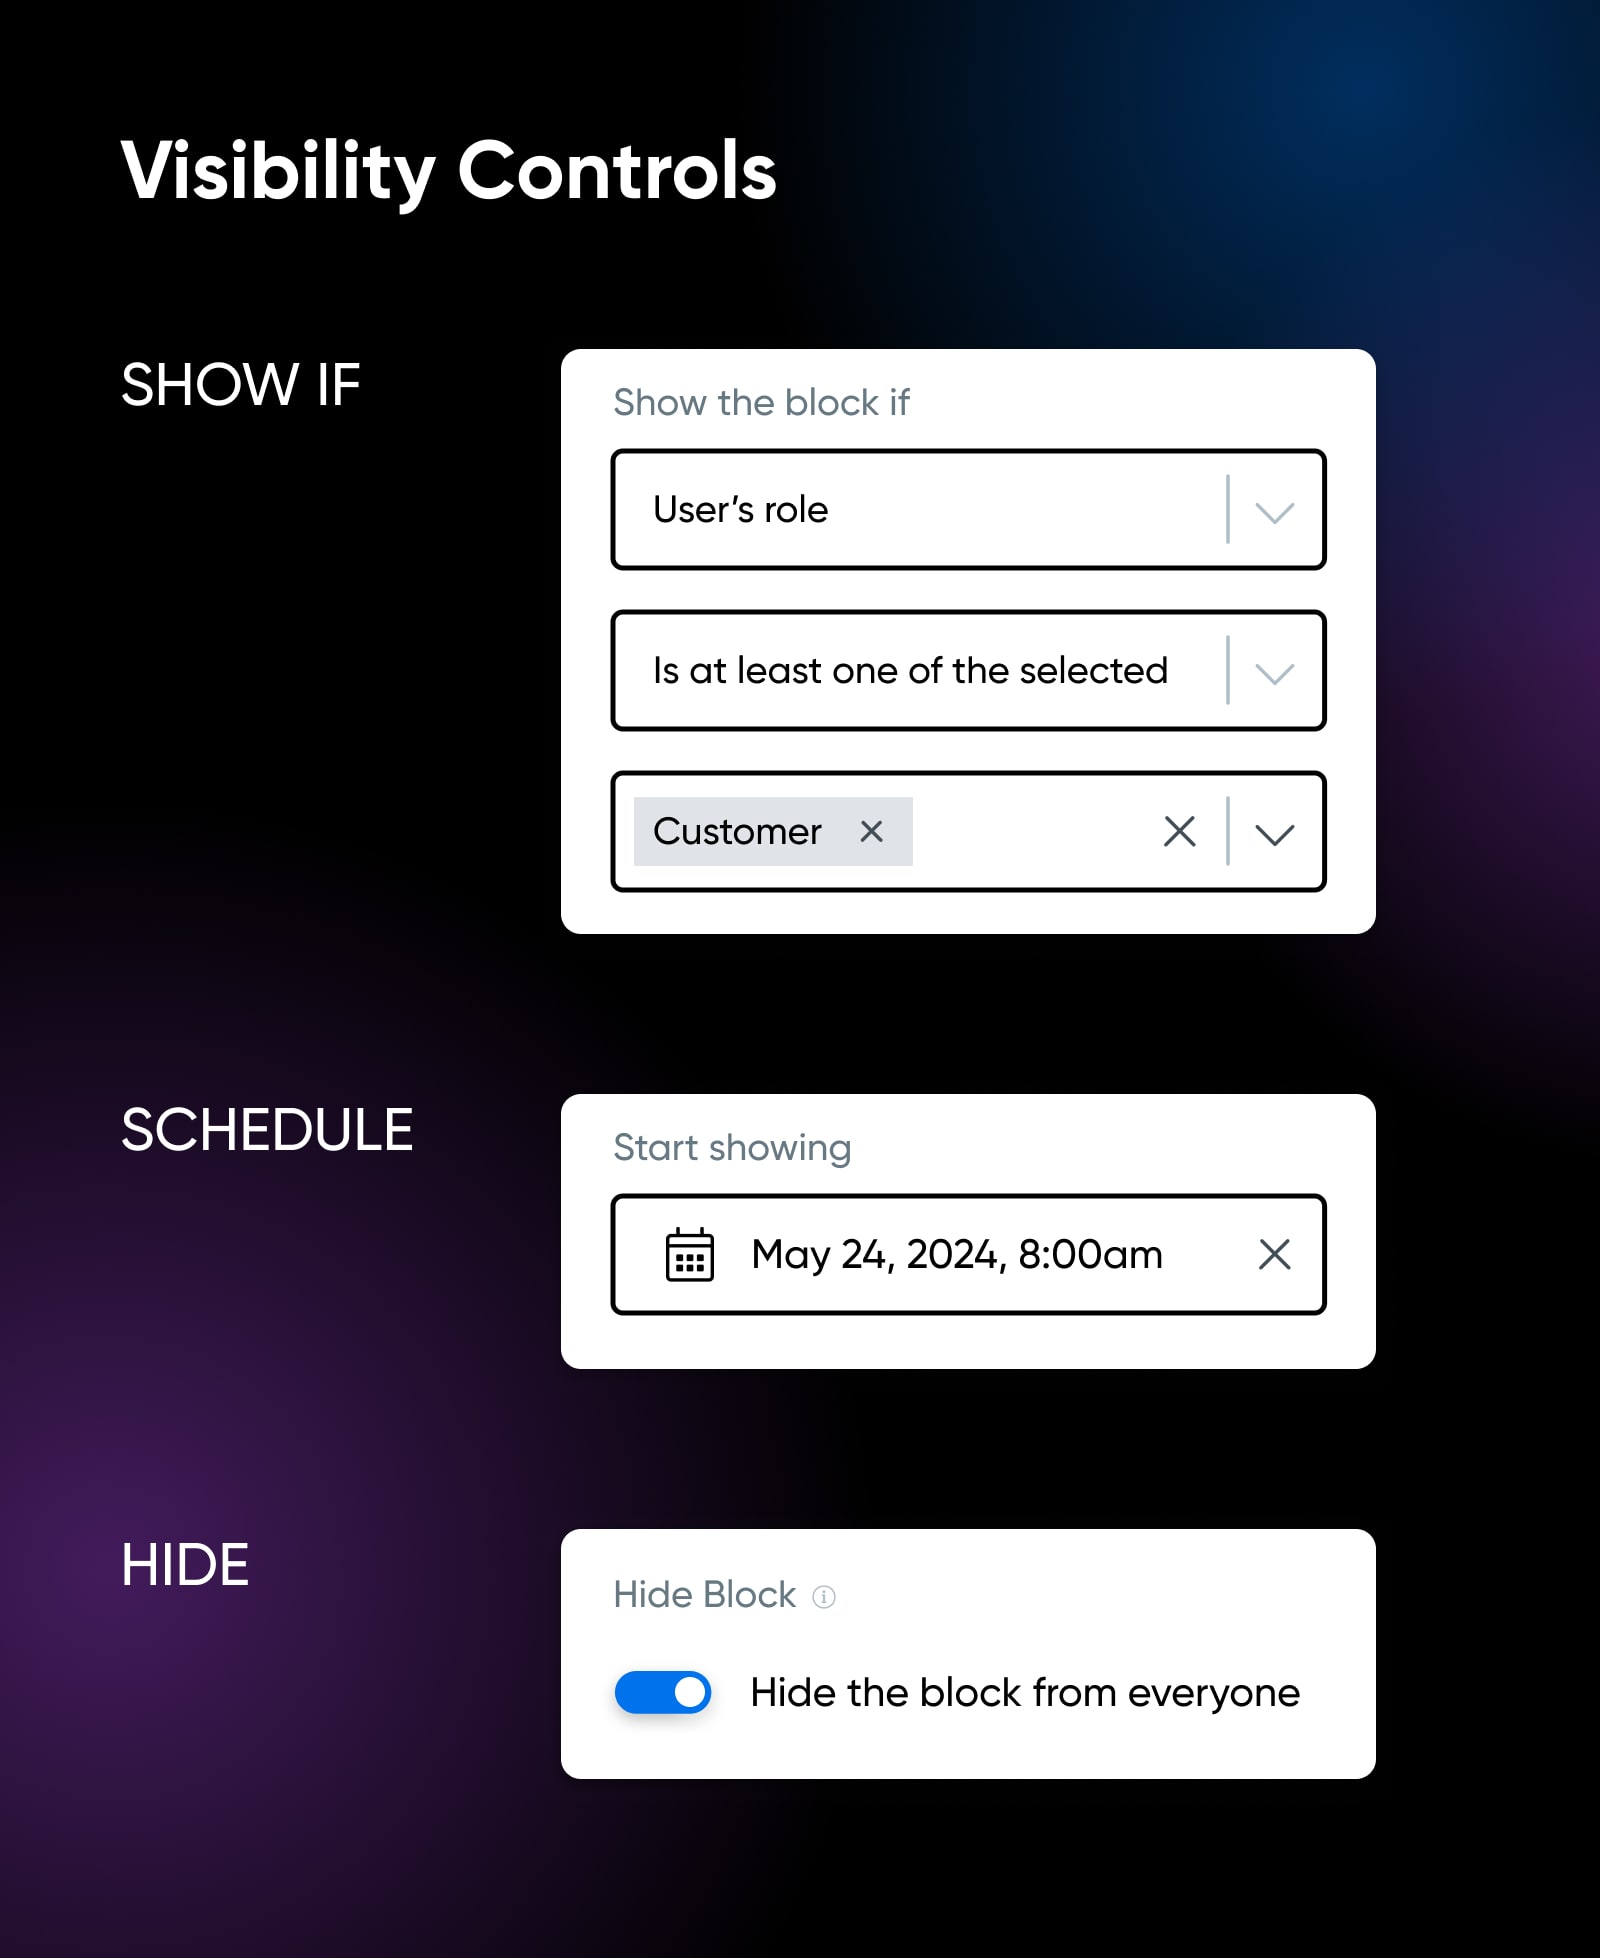 visibility controls, show if, then schedule for, and hide block